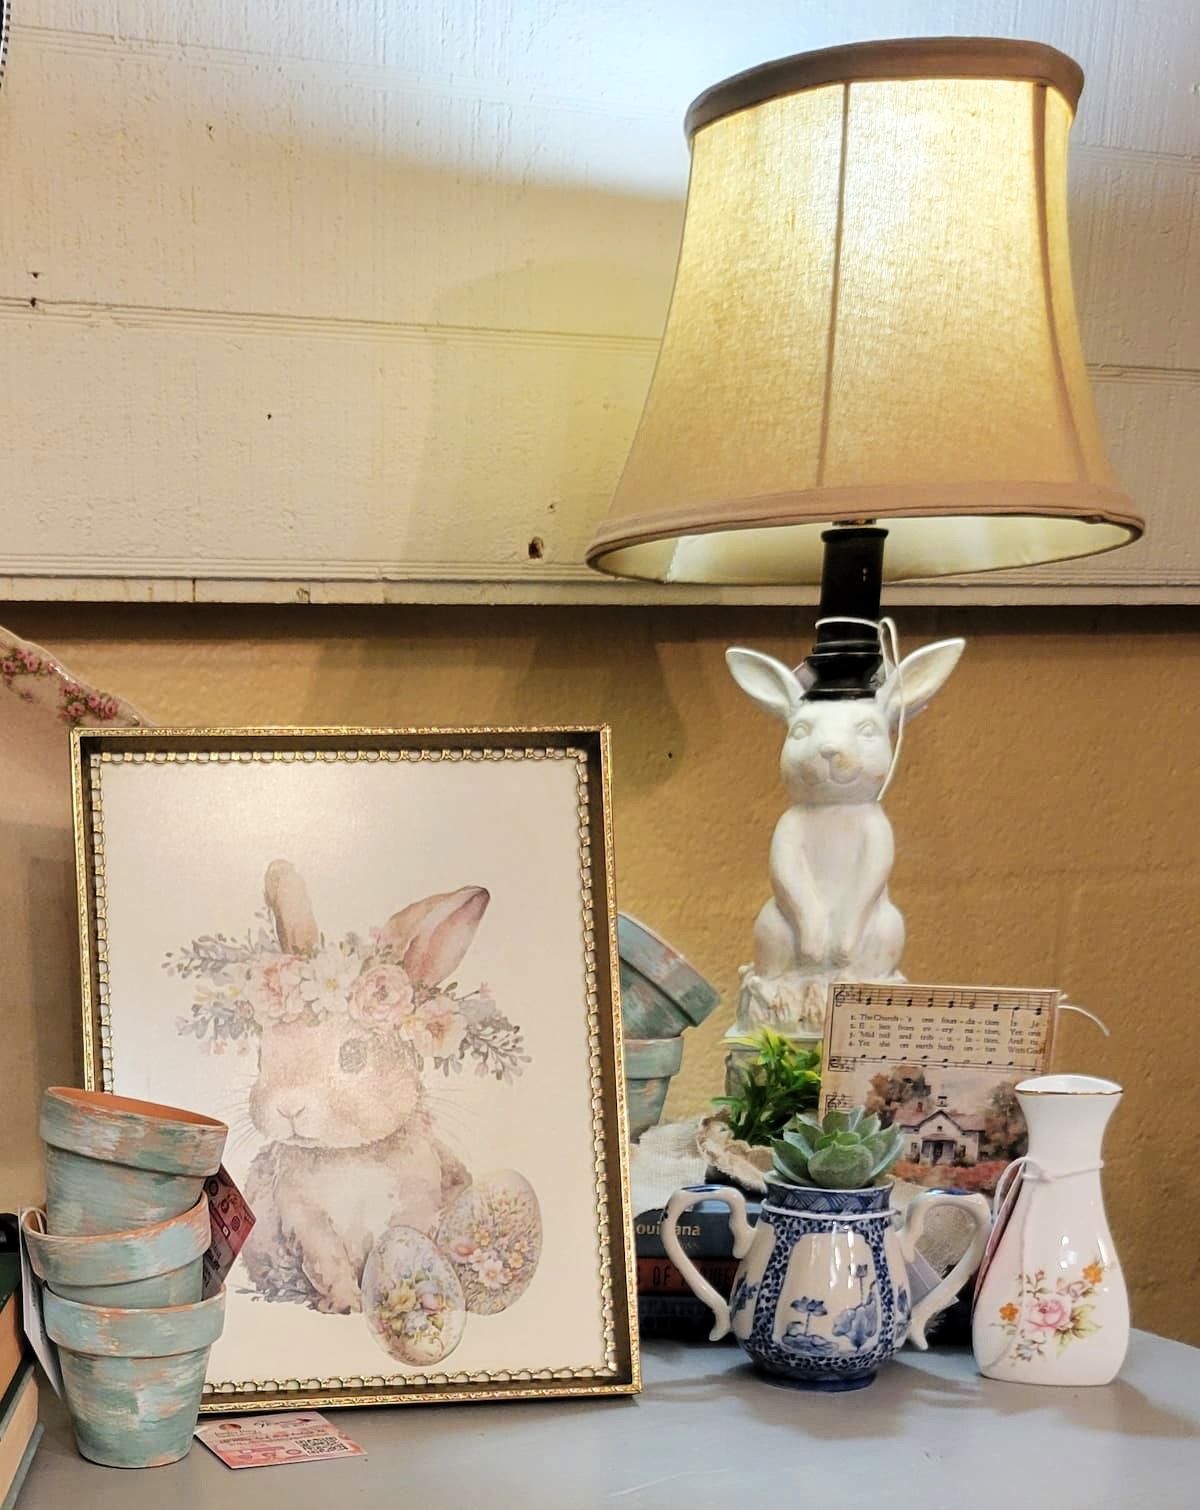 A Rabbit Lamp Gets A Quick and Easy Makeover